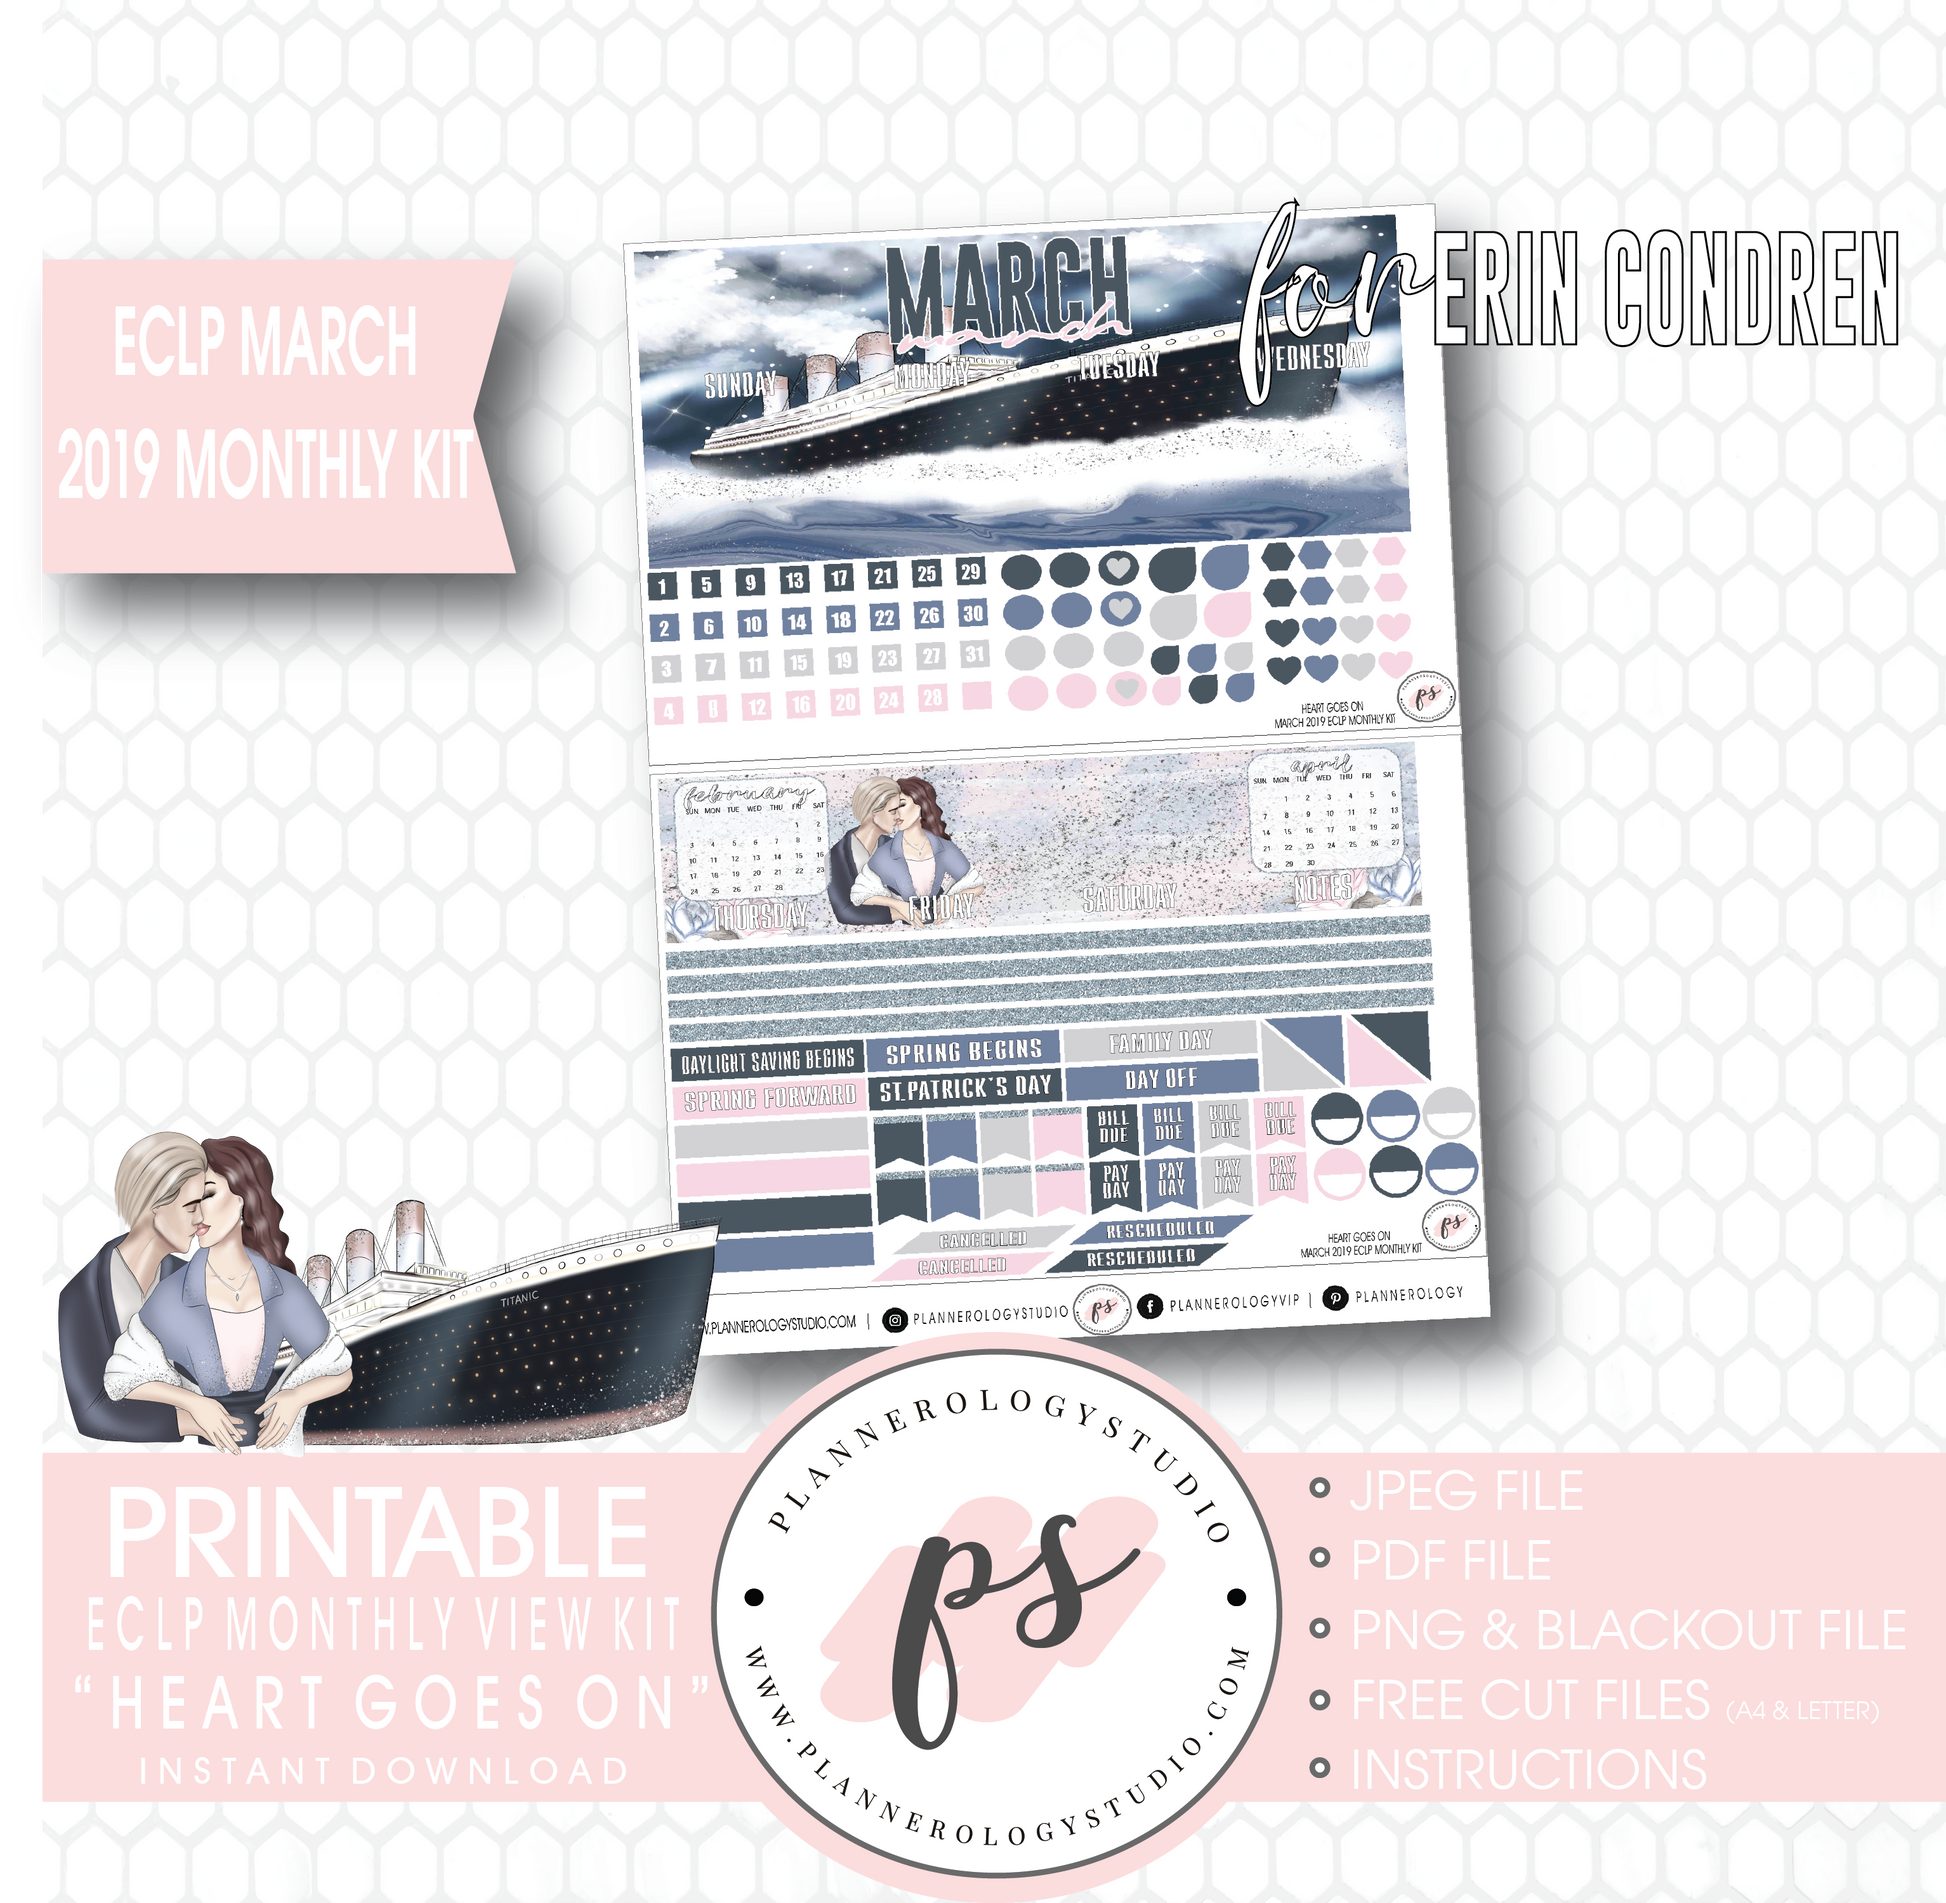 Heart Goes On (Titanic) March 2019 Monthly View Kit Digital Printable Planner Stickers (for use with Erin Condren) - Plannerologystudio